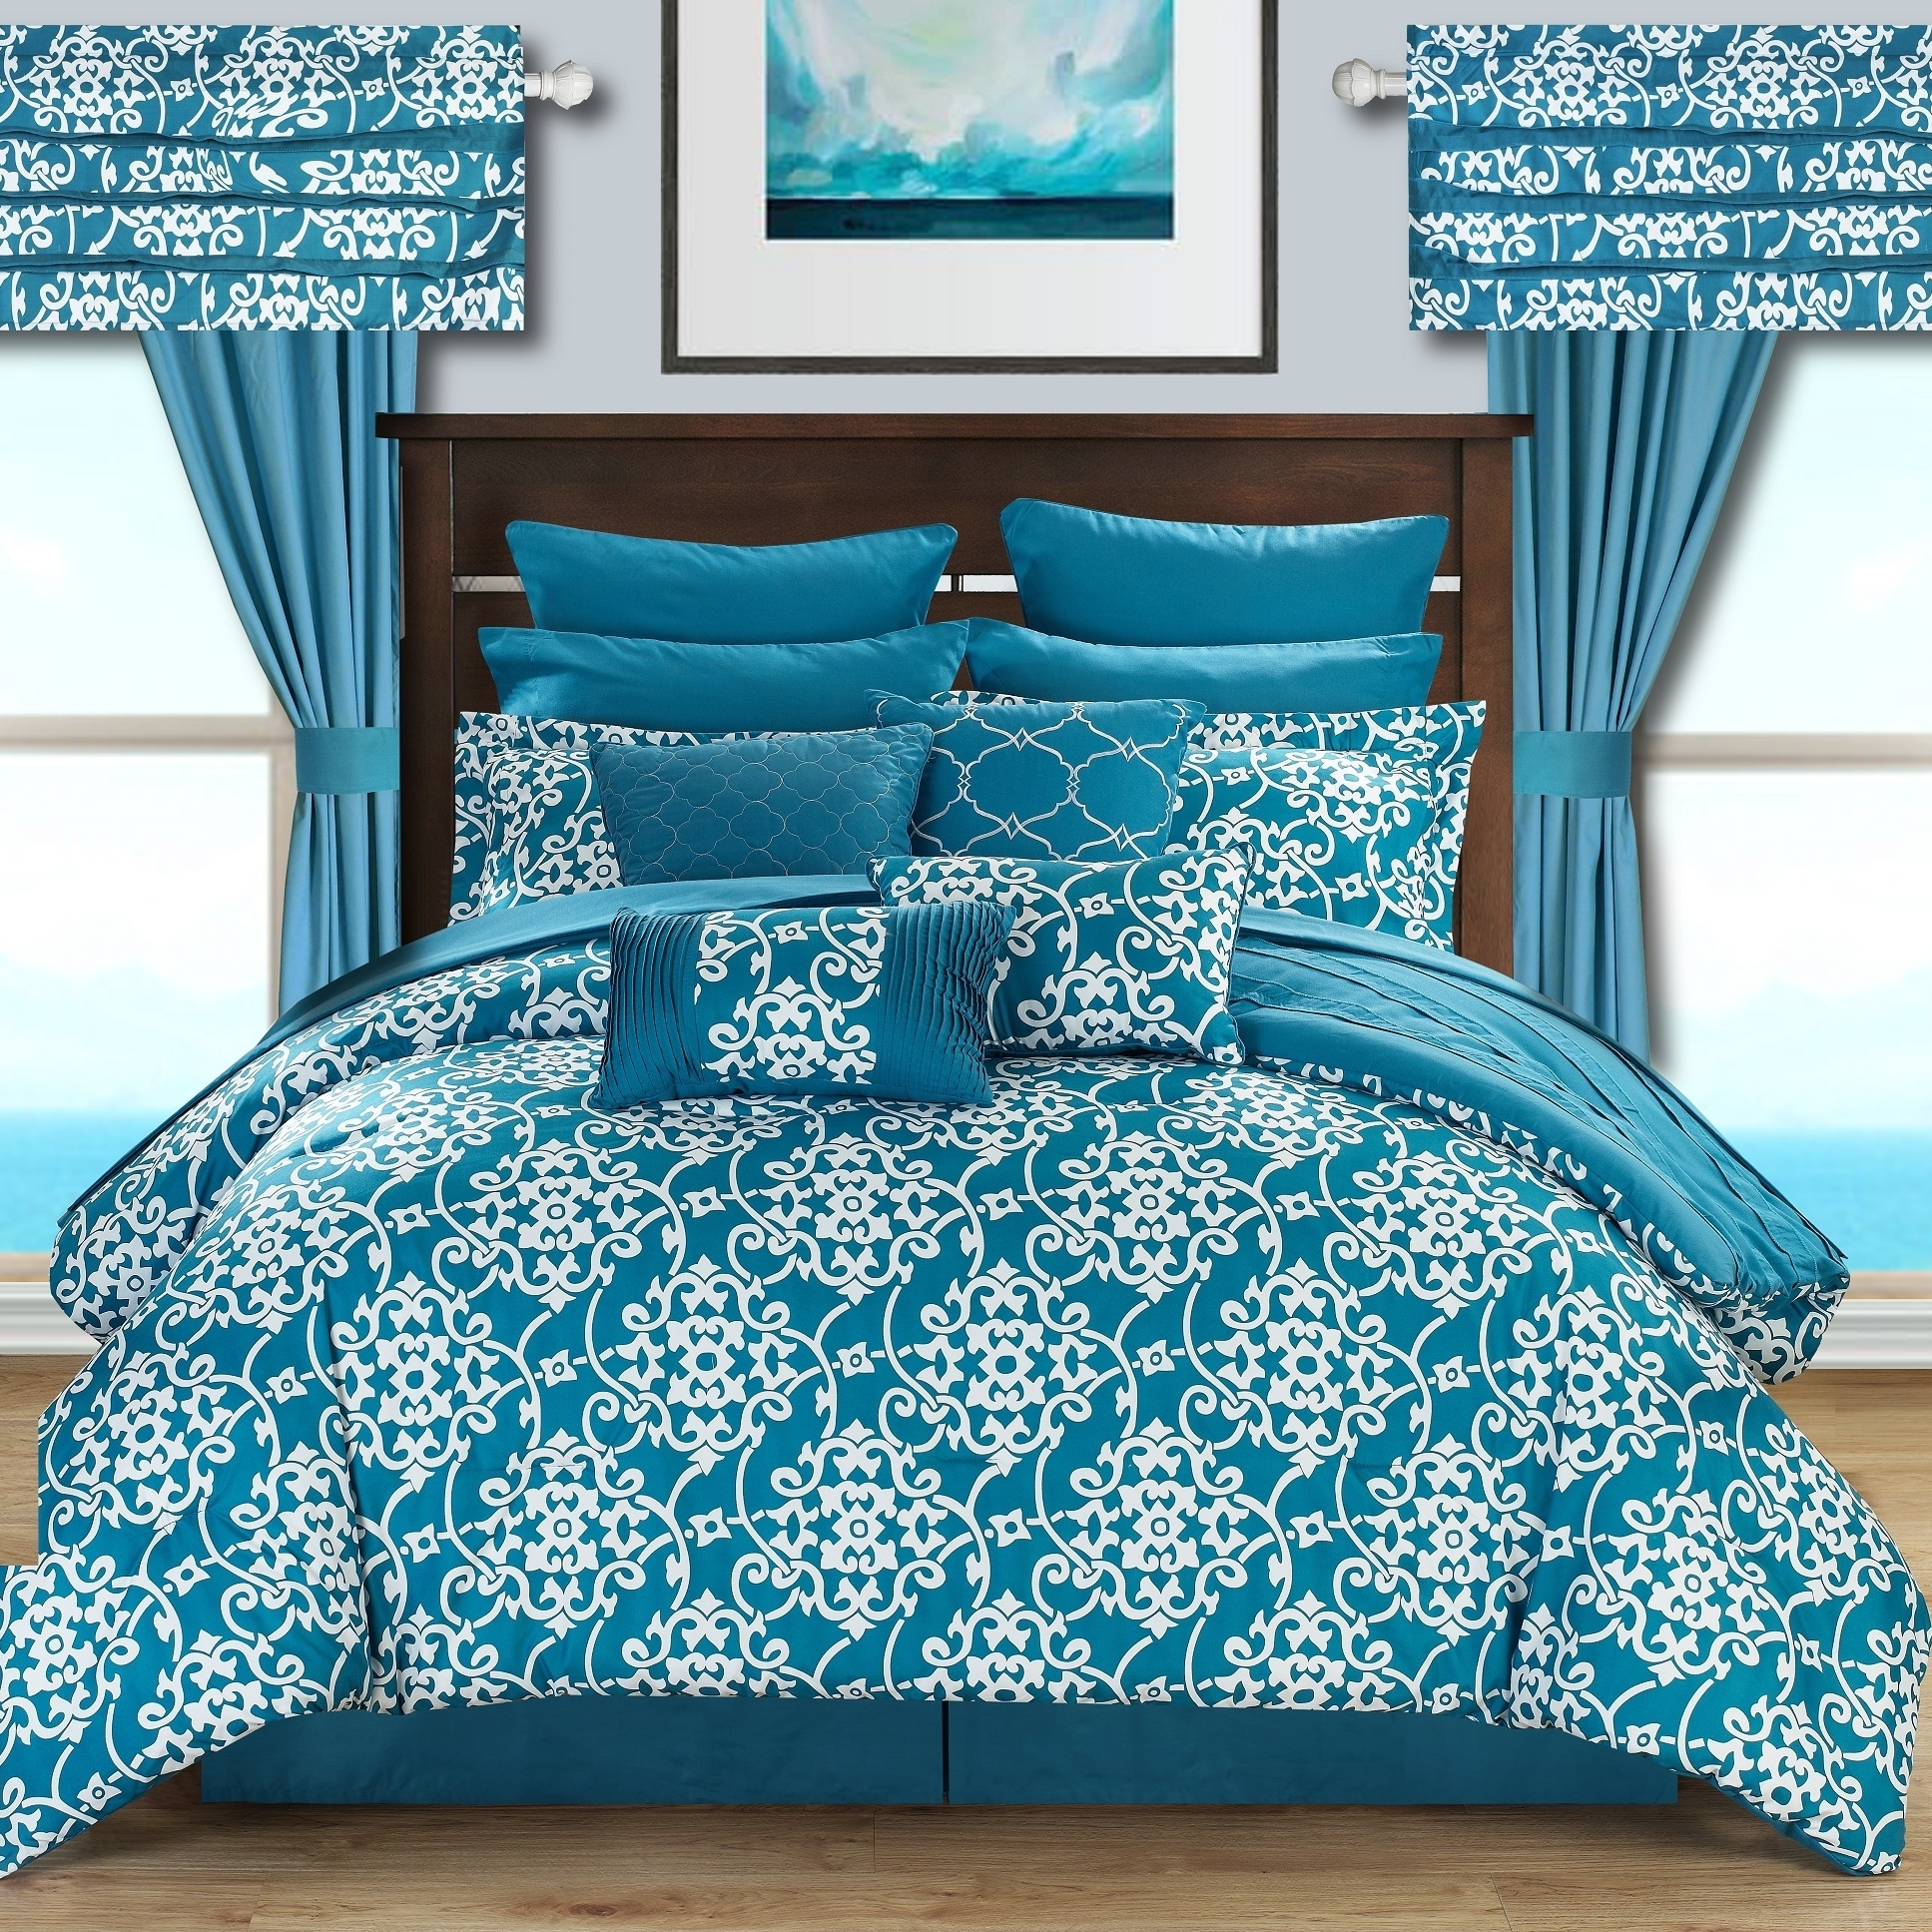 24 Piece Hailee Reversible Printed 2-in-1 Look Comforter Set Includes Sheets - Teal, King